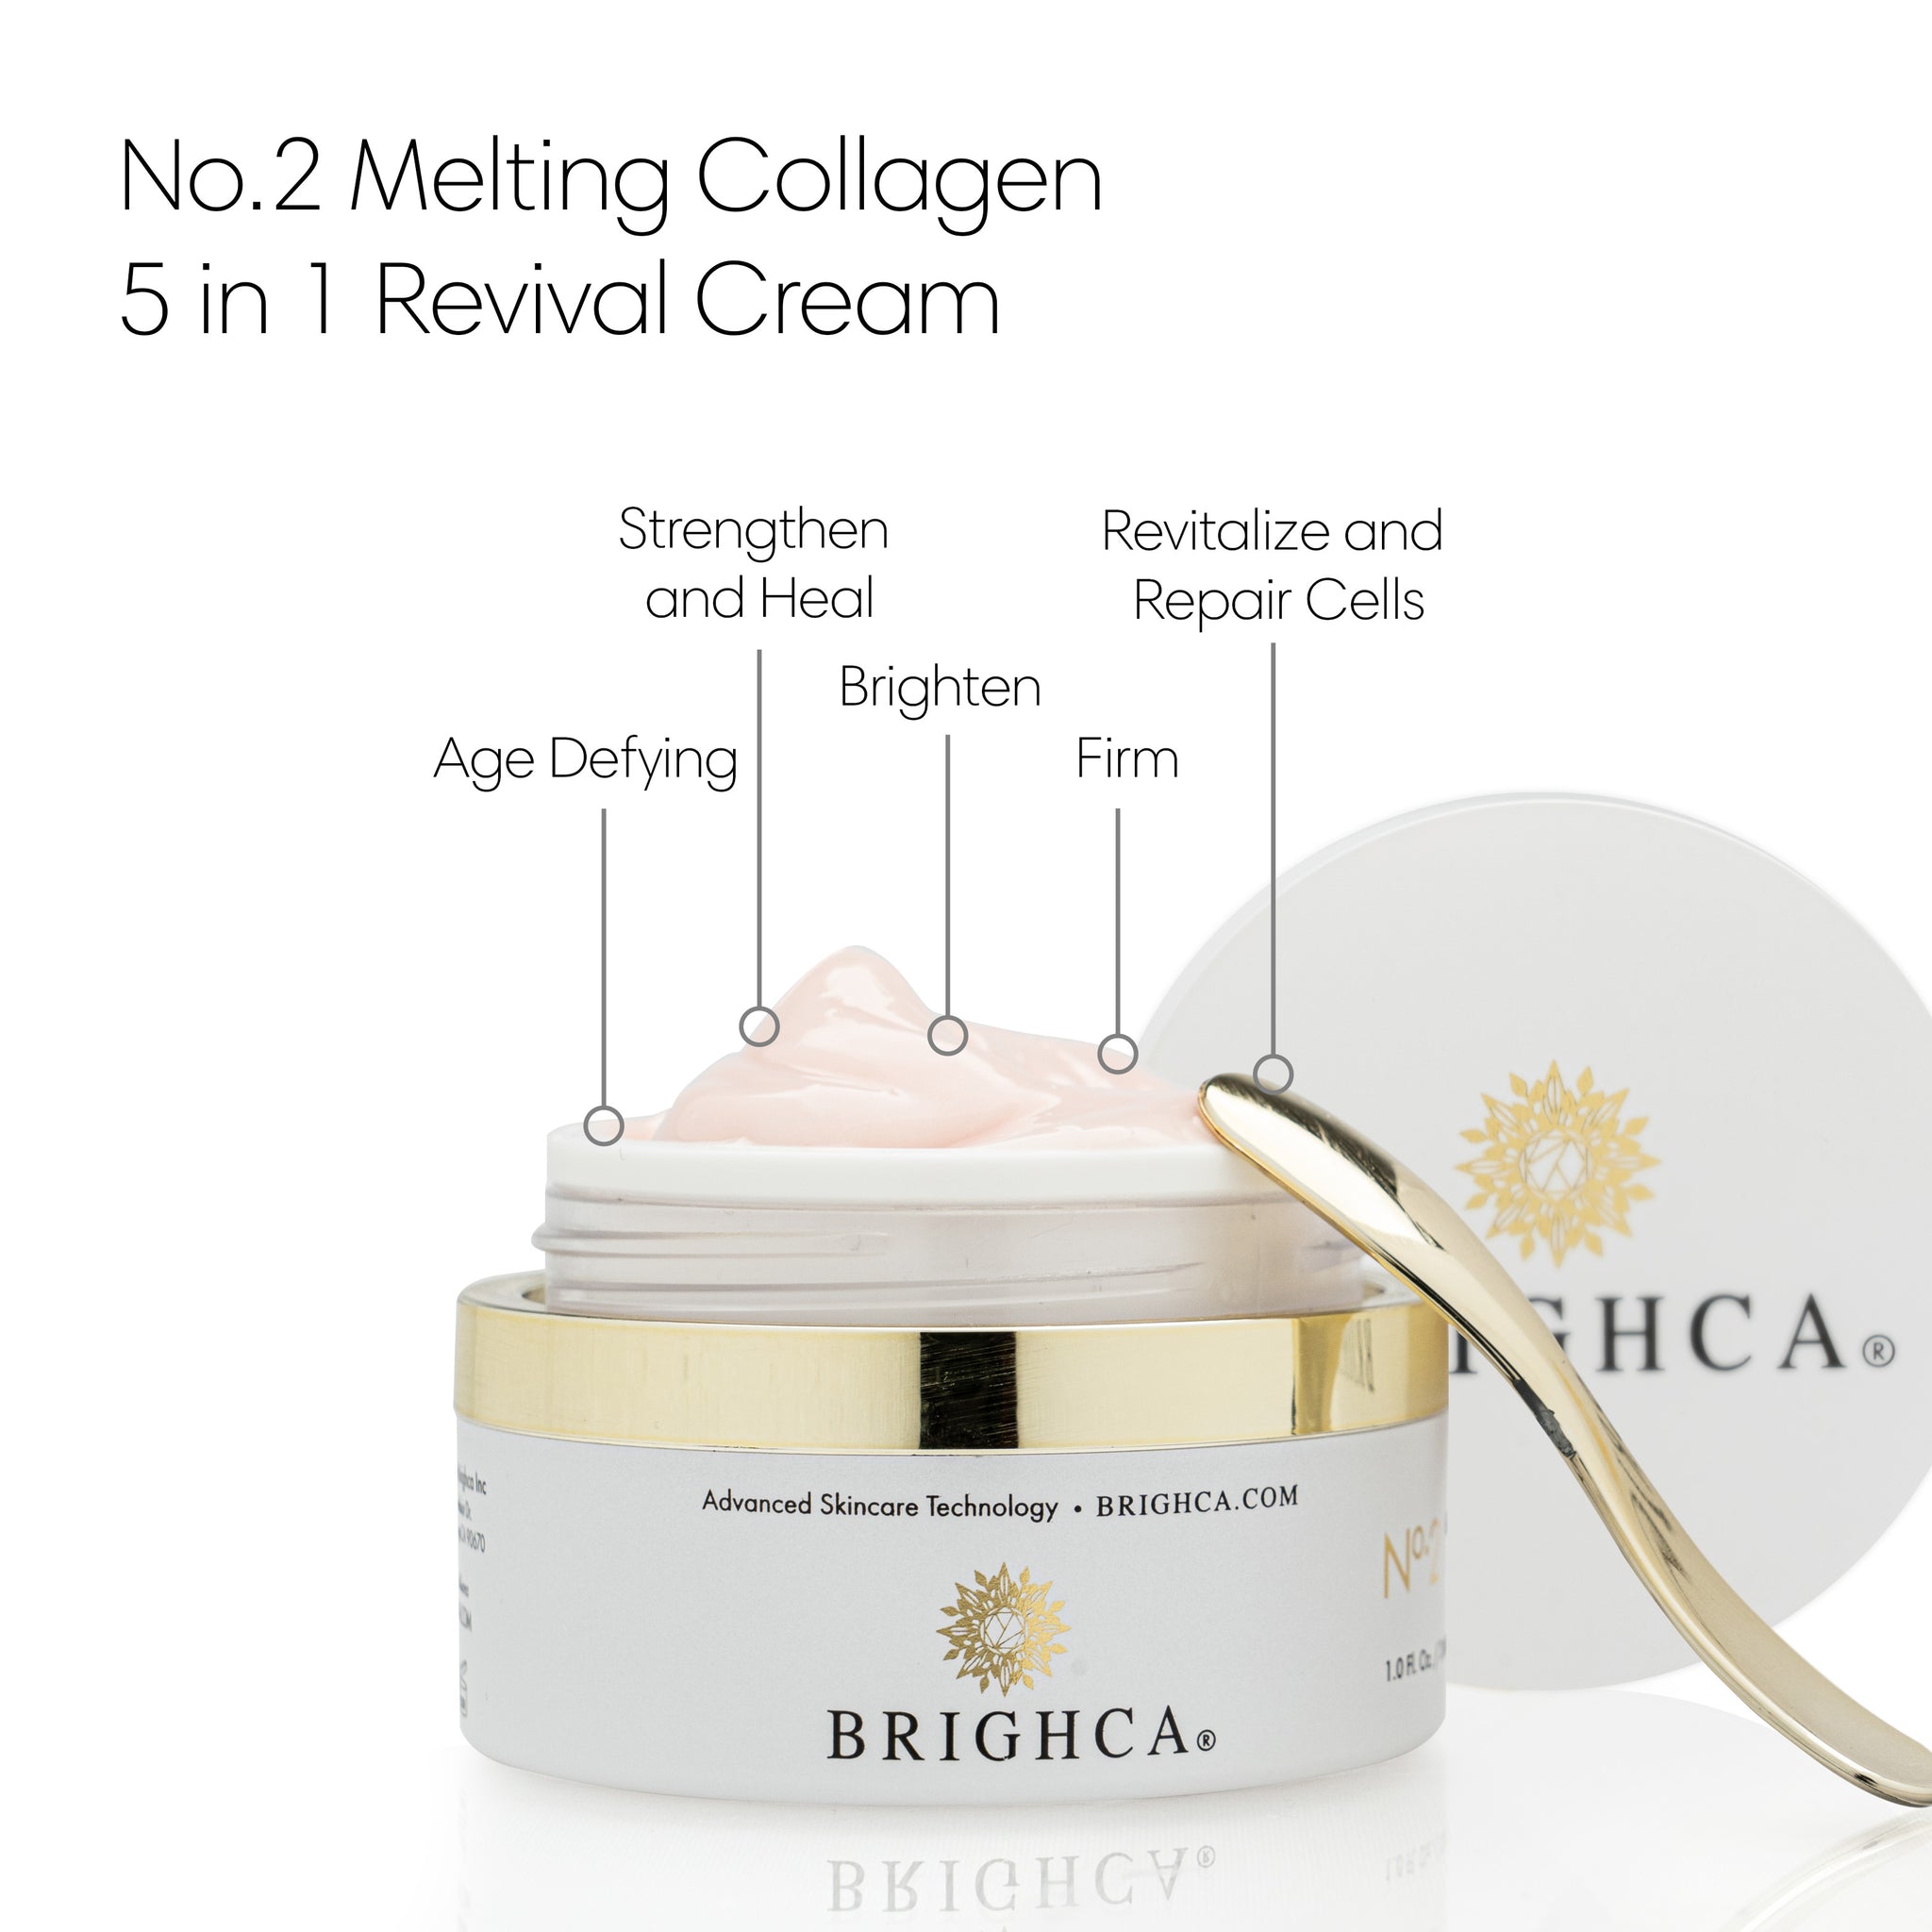 Brighca Melting Collagen 5 in 1 Revival cream for age defying, strengthening, healing, brightening, firming and revitalizing and repairing